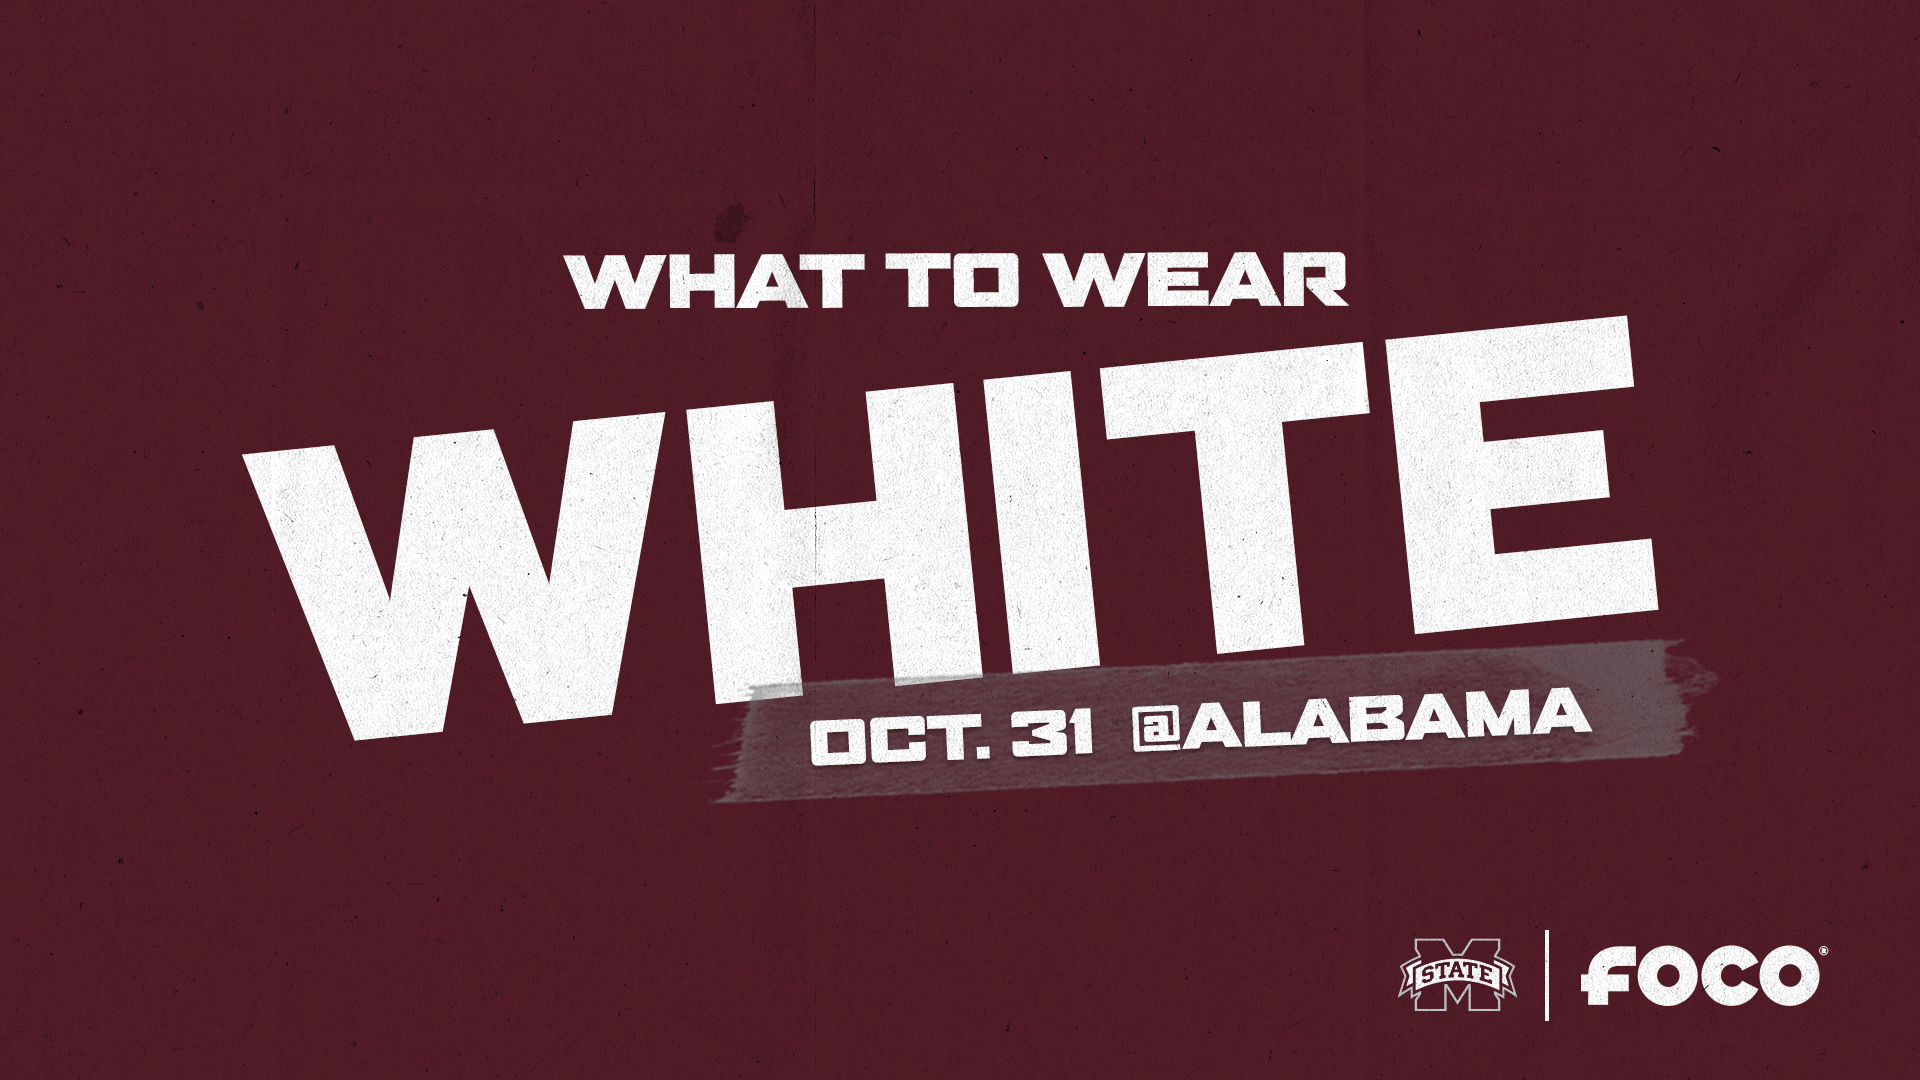 Maroon graphic with the words "What to Wear WHITE" encouraging fans to wear white to the Oct. 31 football game versus Alabama